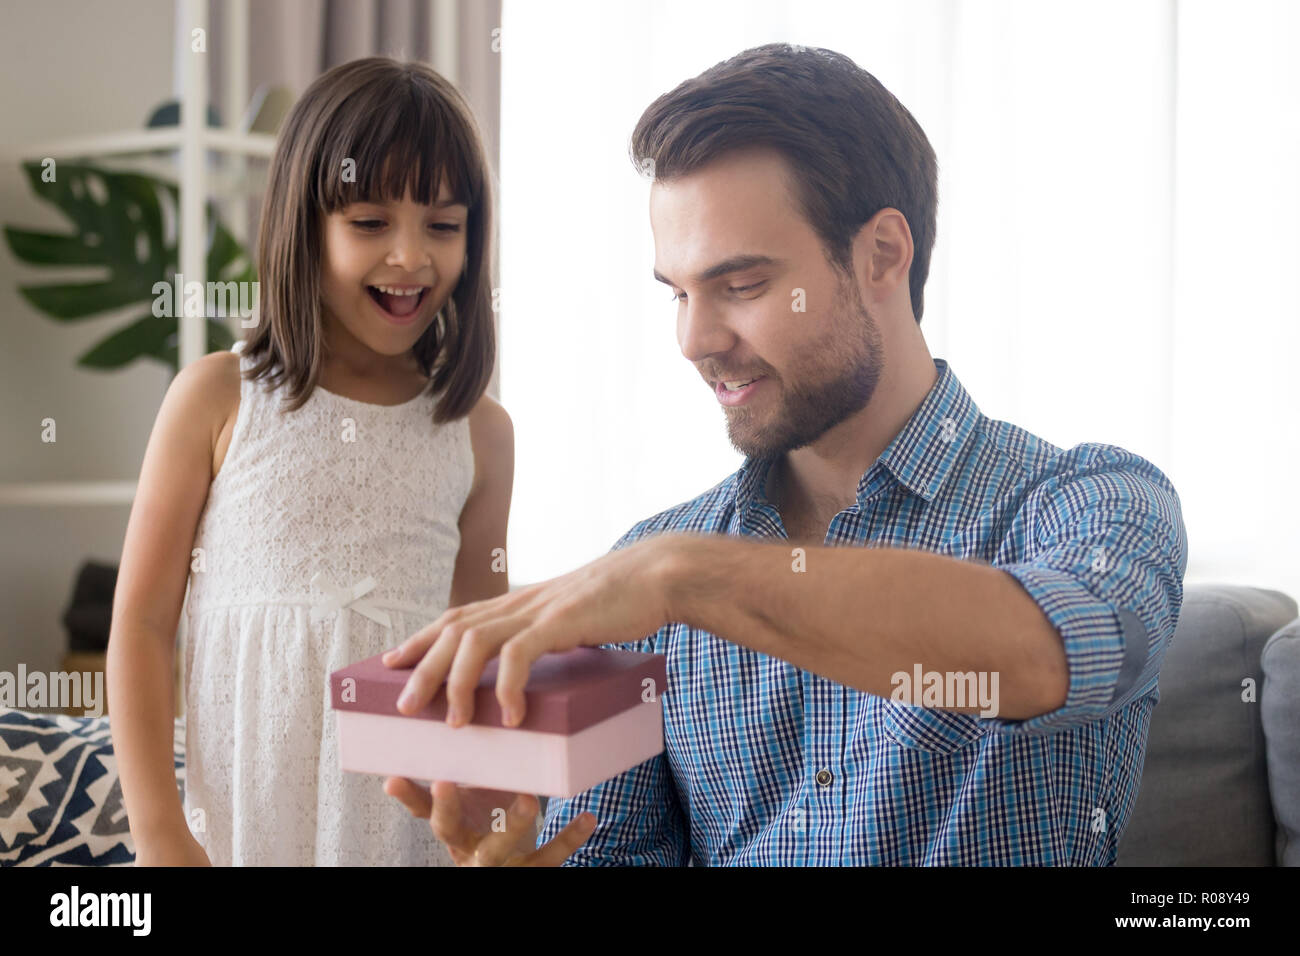 Little daughter prepares for daddy gift at fathers day Stock Photo